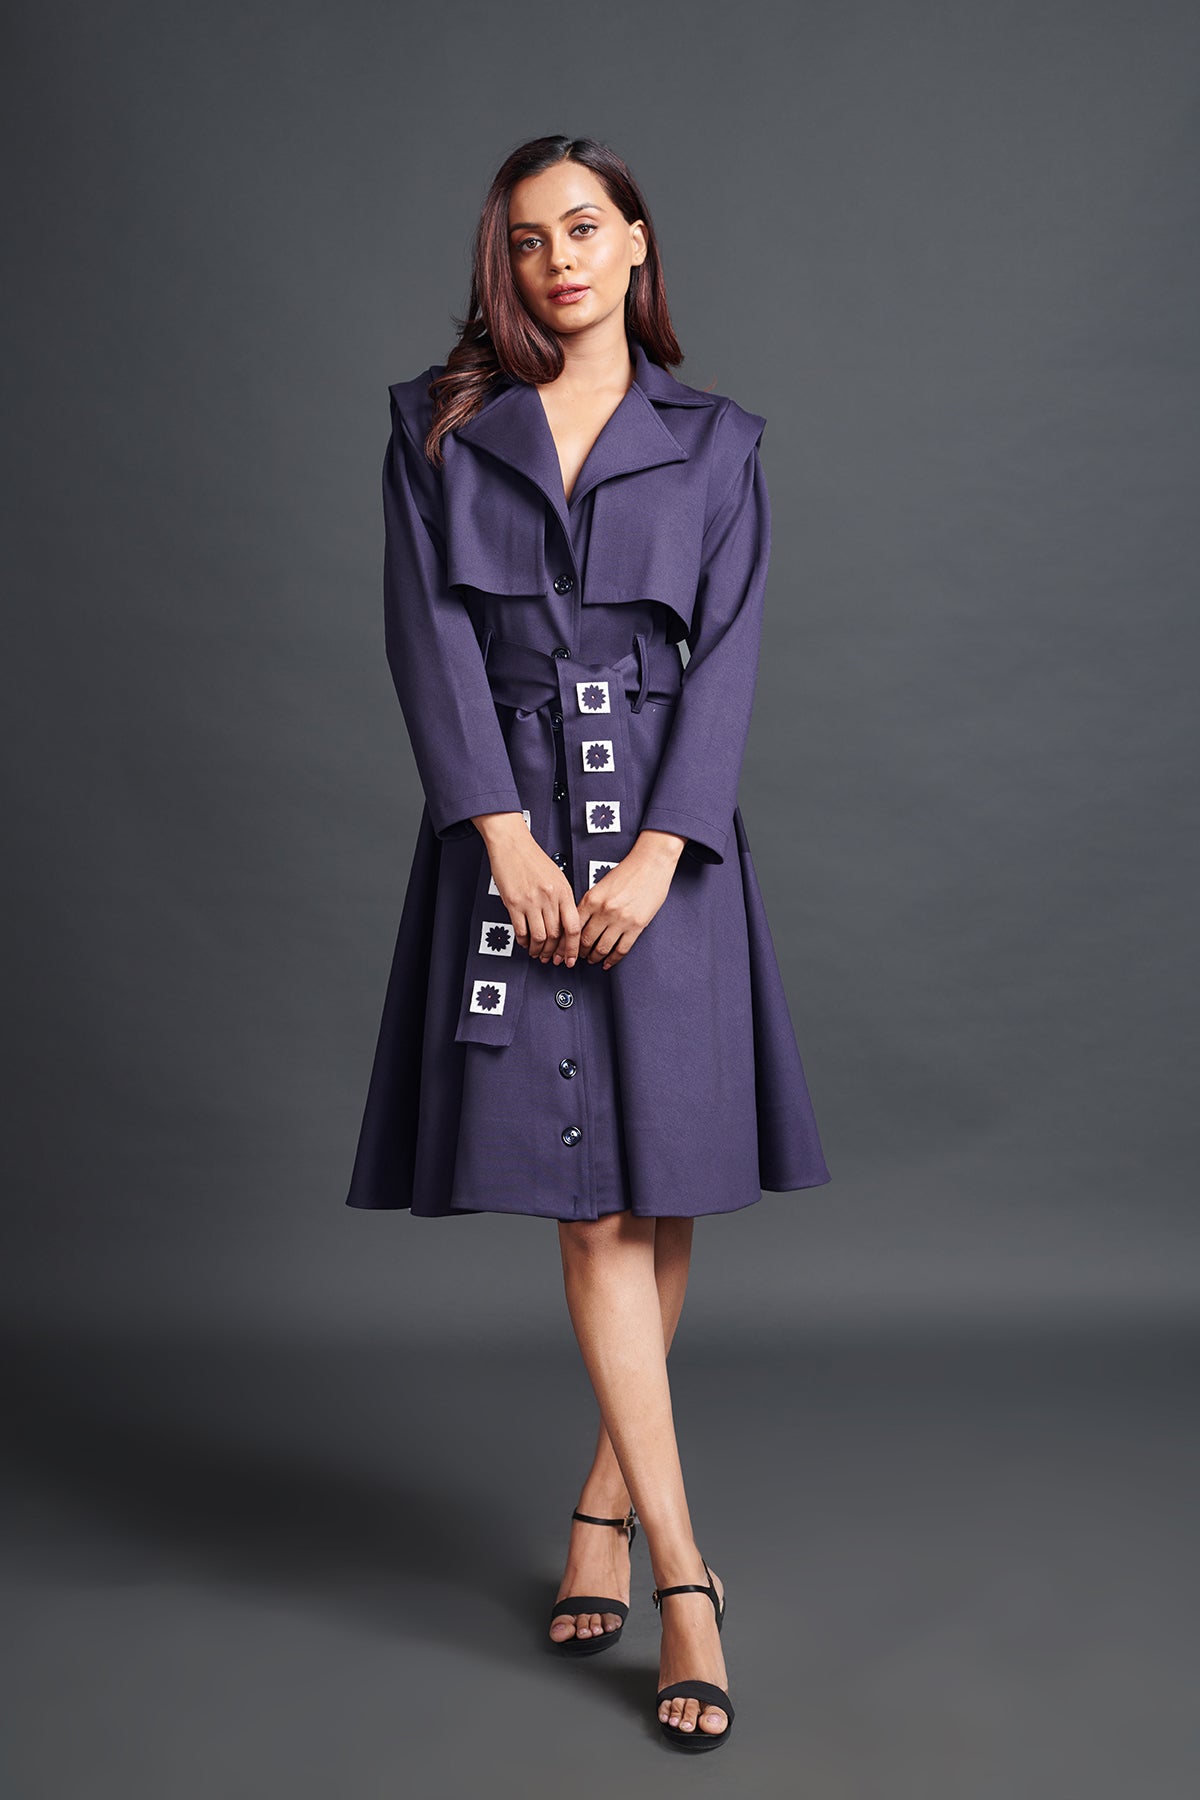 Image of PURPLE A SUMURAI INSPIRED JACKET DRESS WITH SASH BELT. From savoirfashions.com